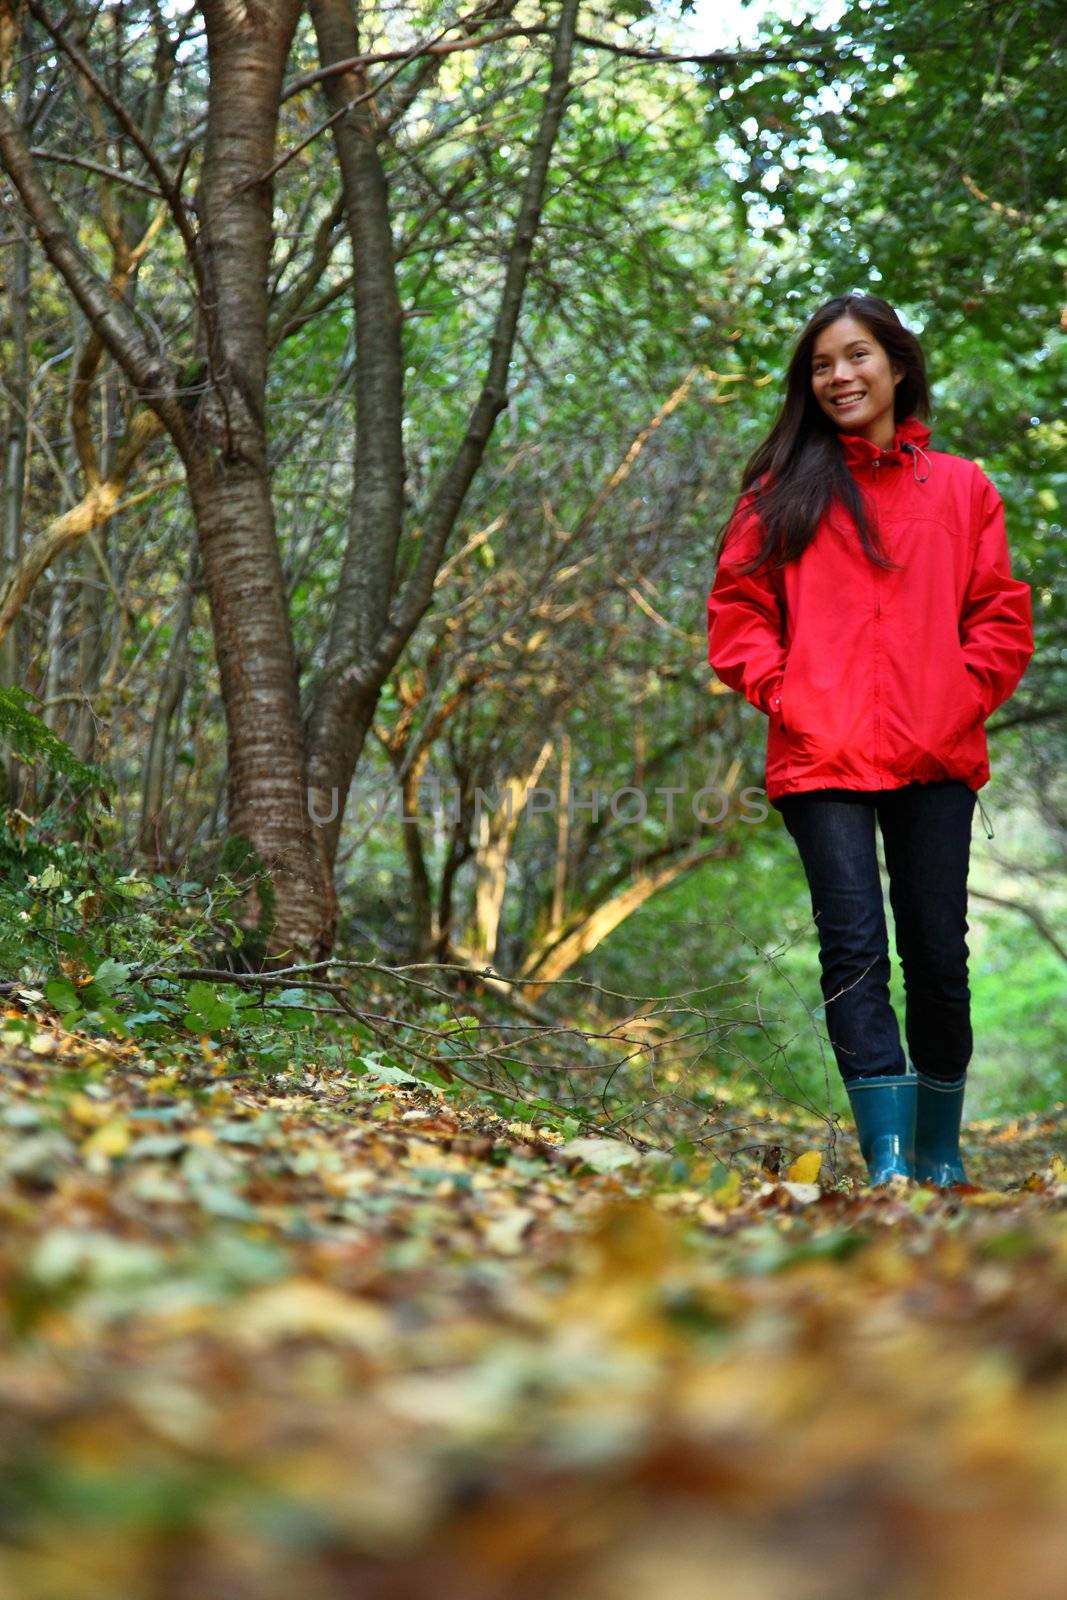 Autumn woman. Beautiful woman walking in the forest on a fall day.